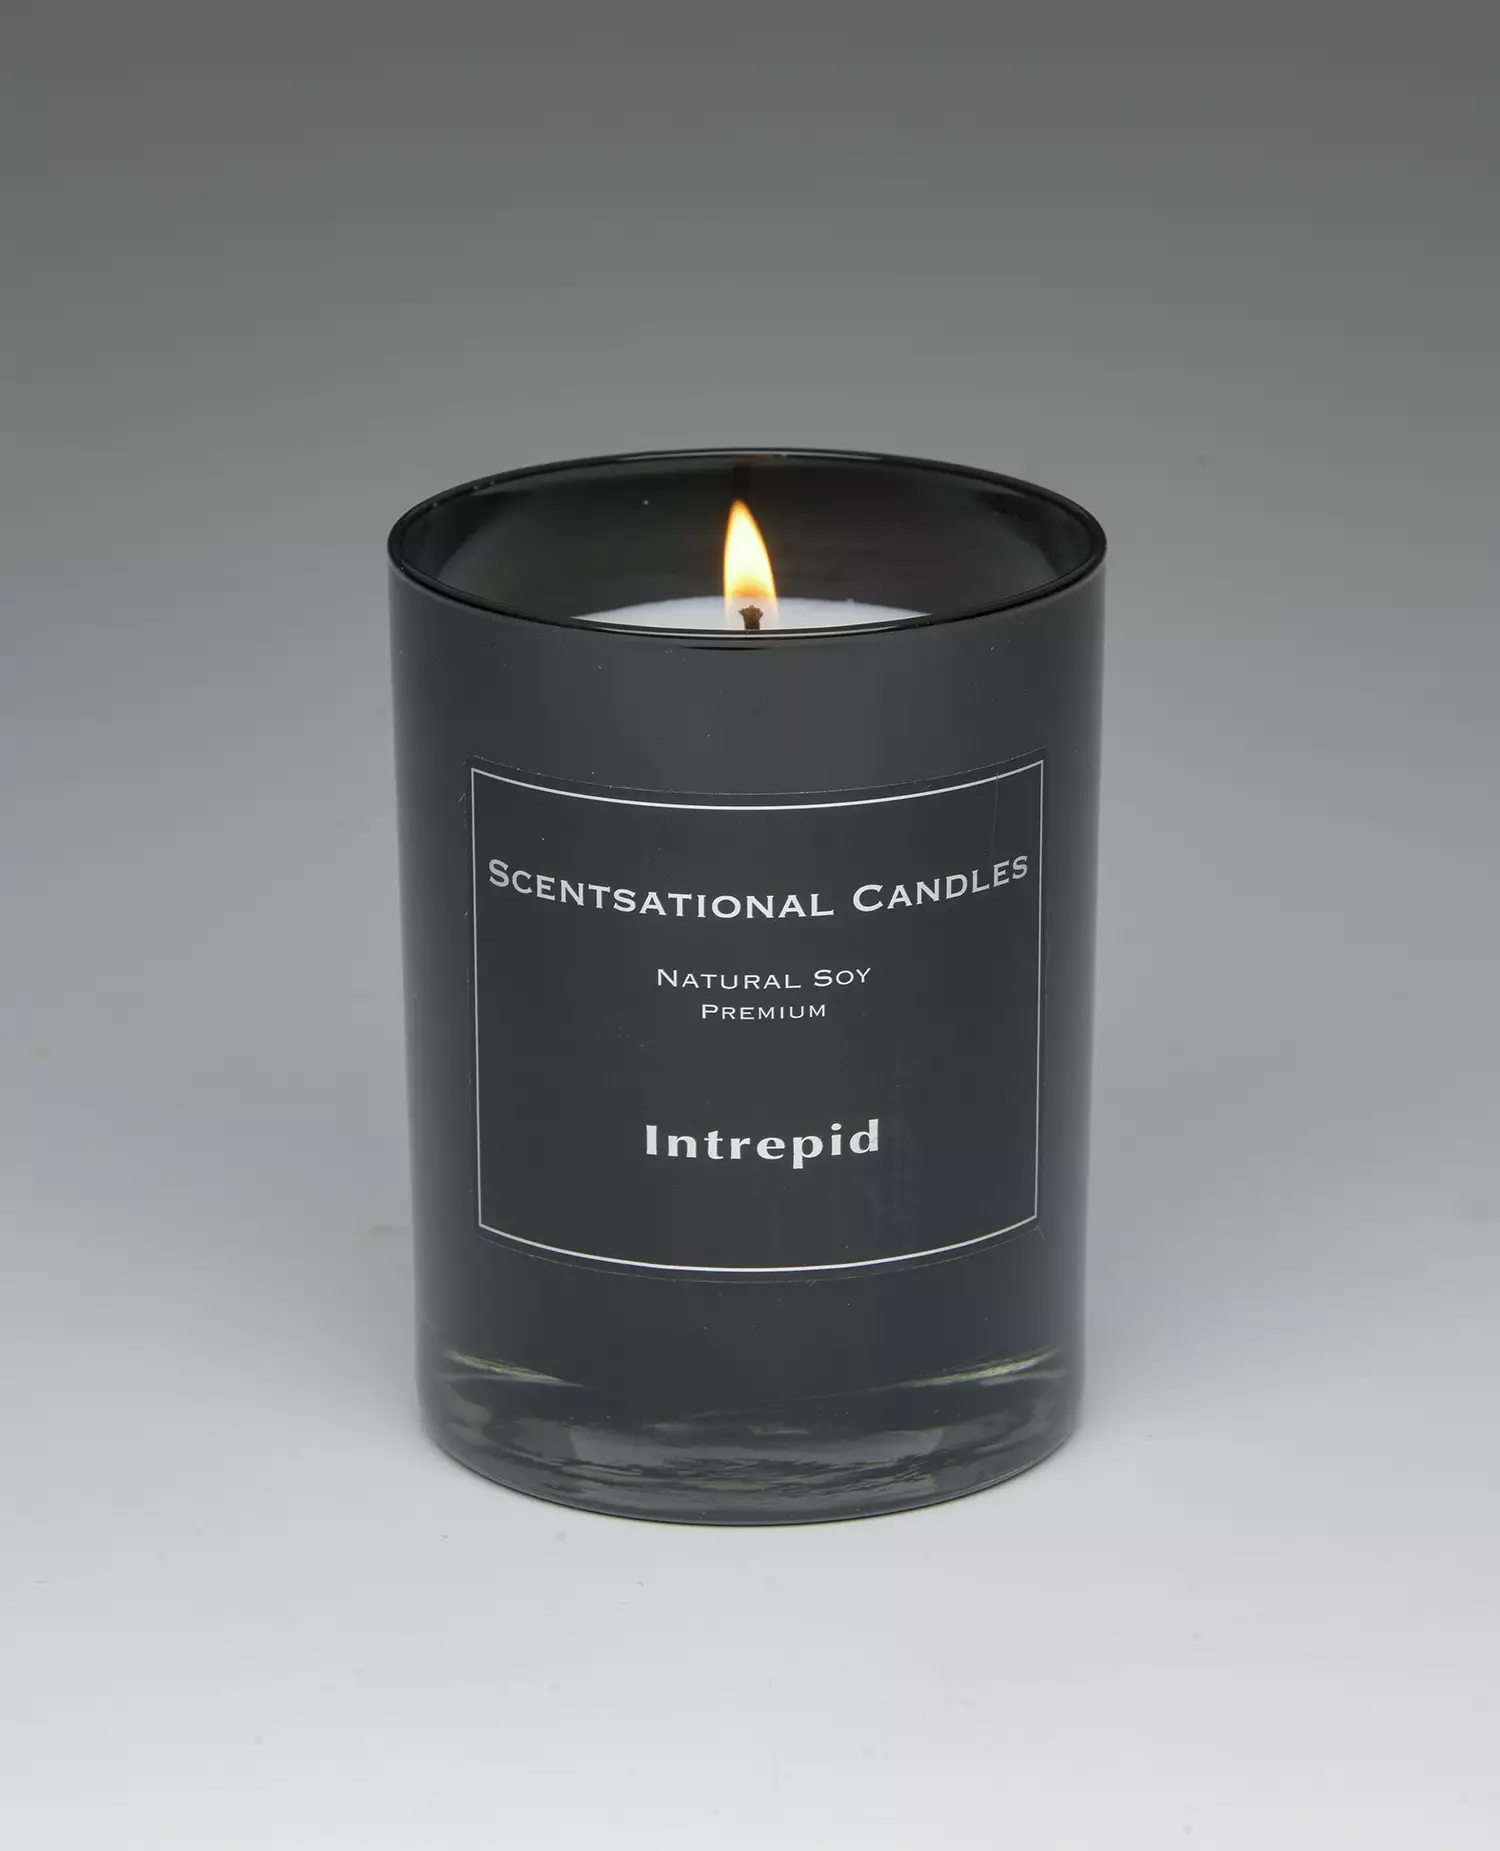 Intrepid – 11oz scented candle burning